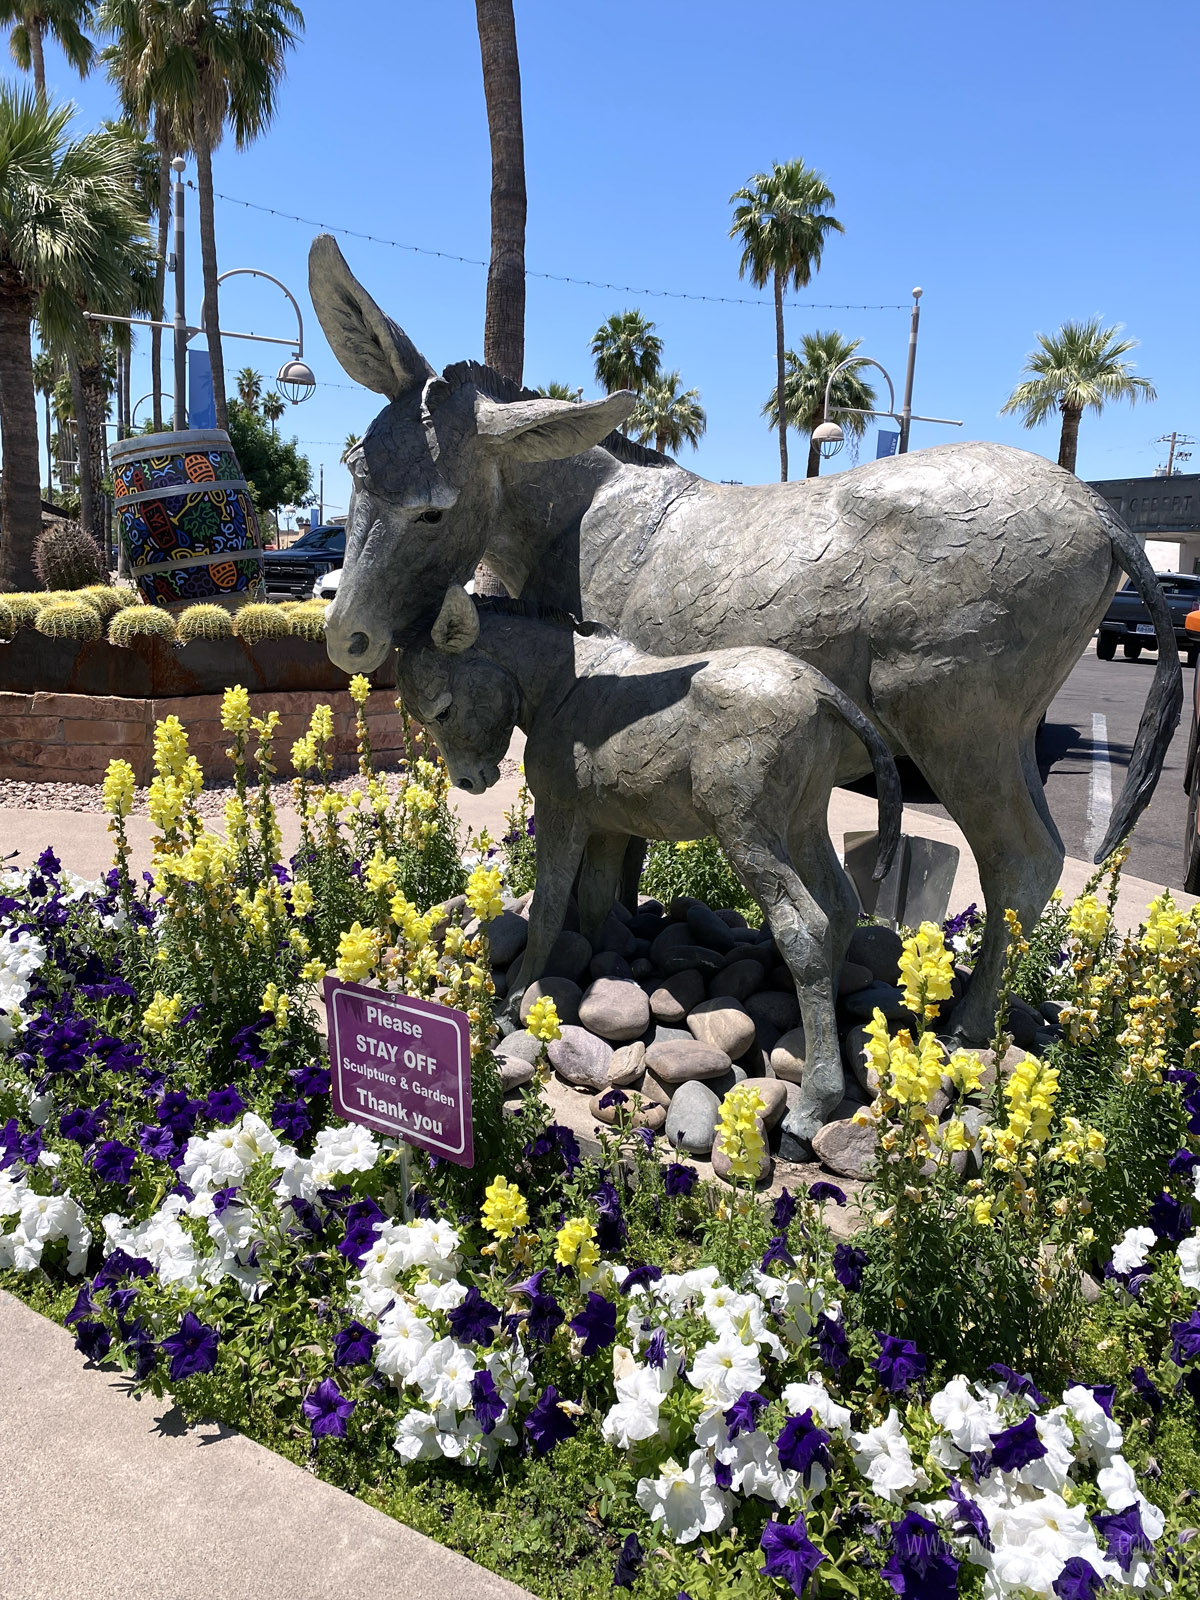 sculpture of a donkey and its baby in Old Town, a must see during your weekend in Scottsdale